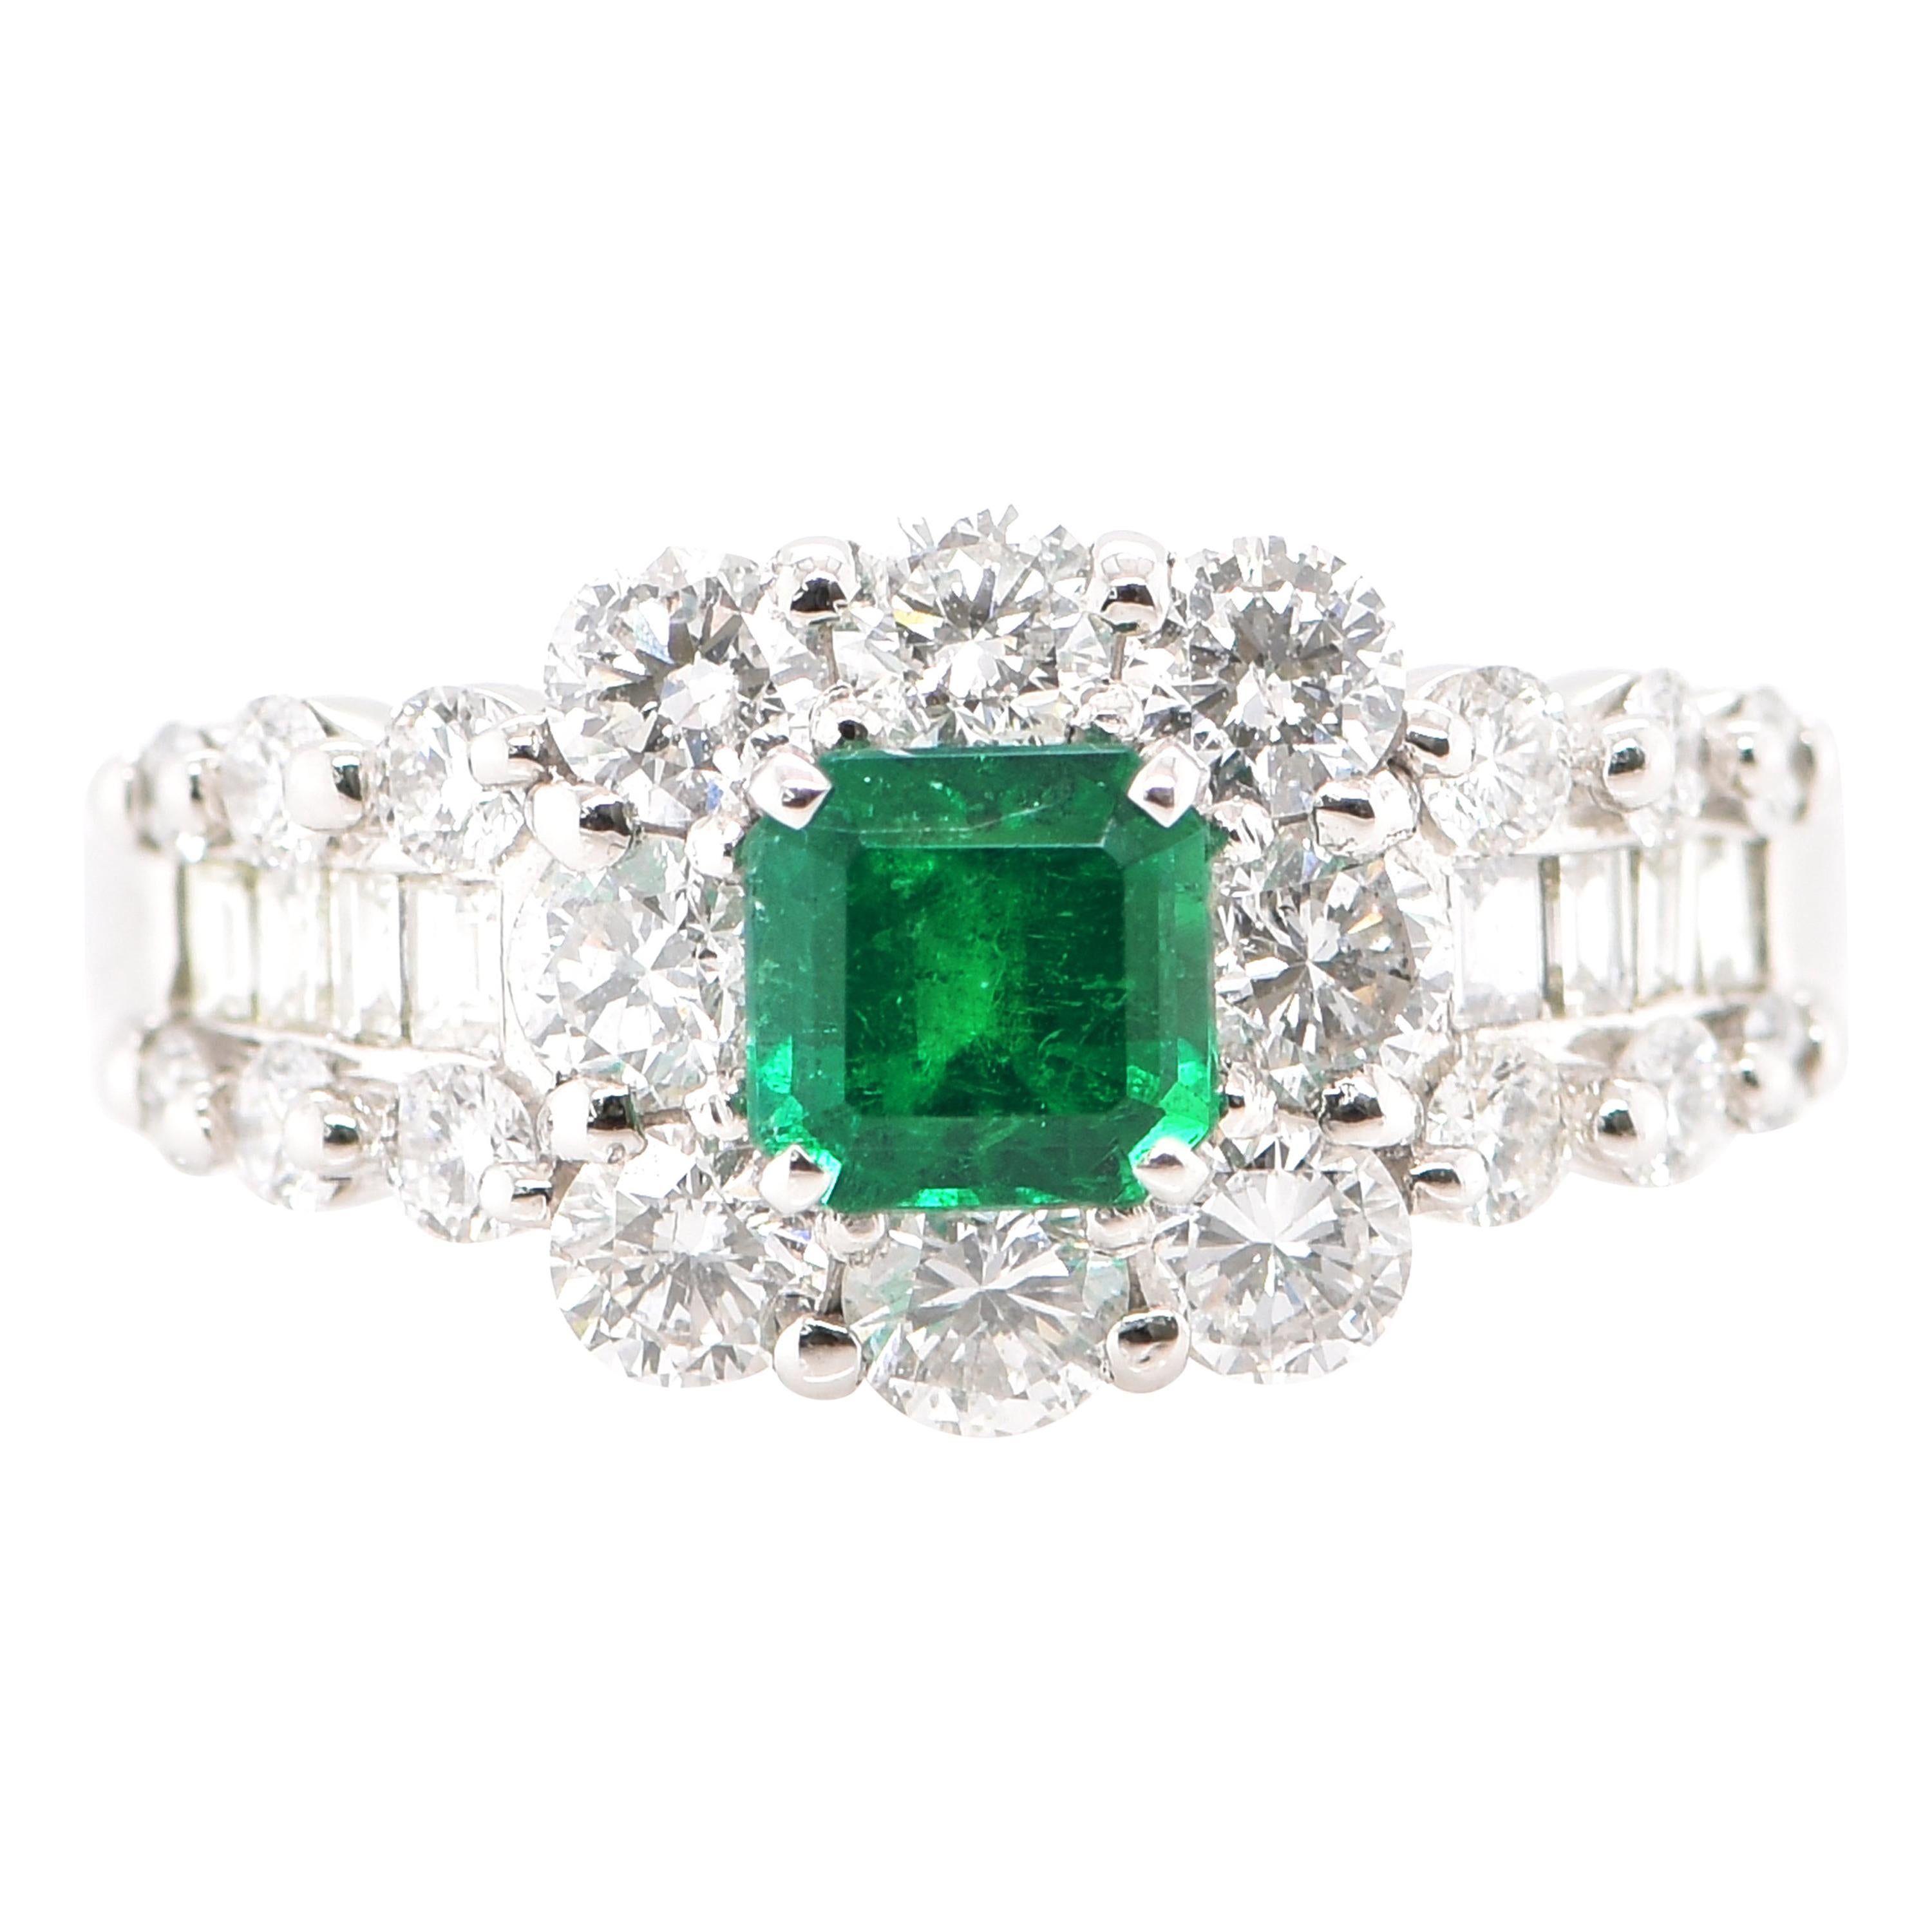 GIA Certified 0.73 Carat Colombian Emerald and Diamond Ring Set in Platinum